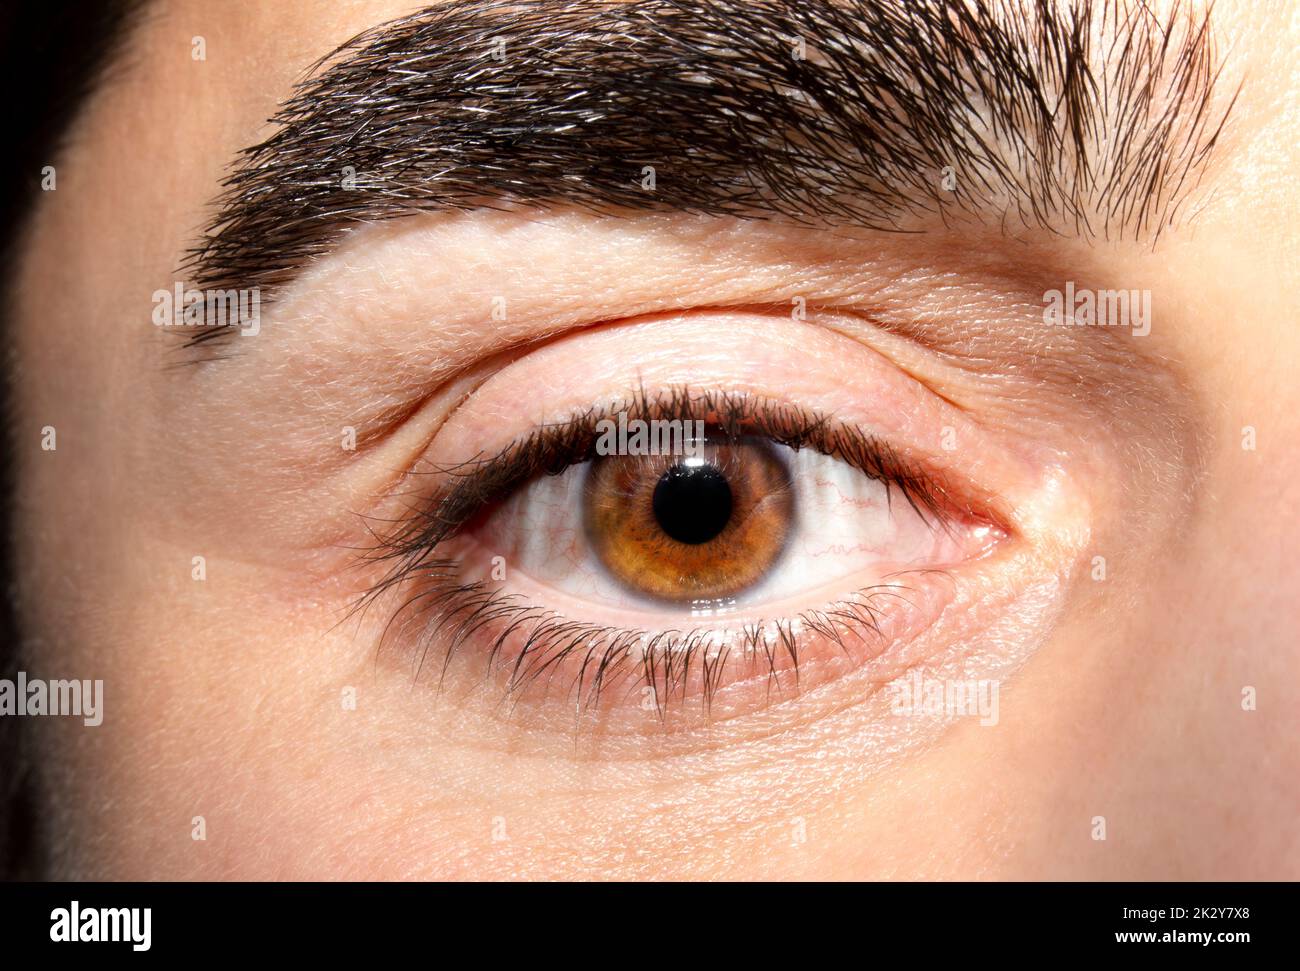 Image of man's brown eye close up. Insightful look Stock Photo